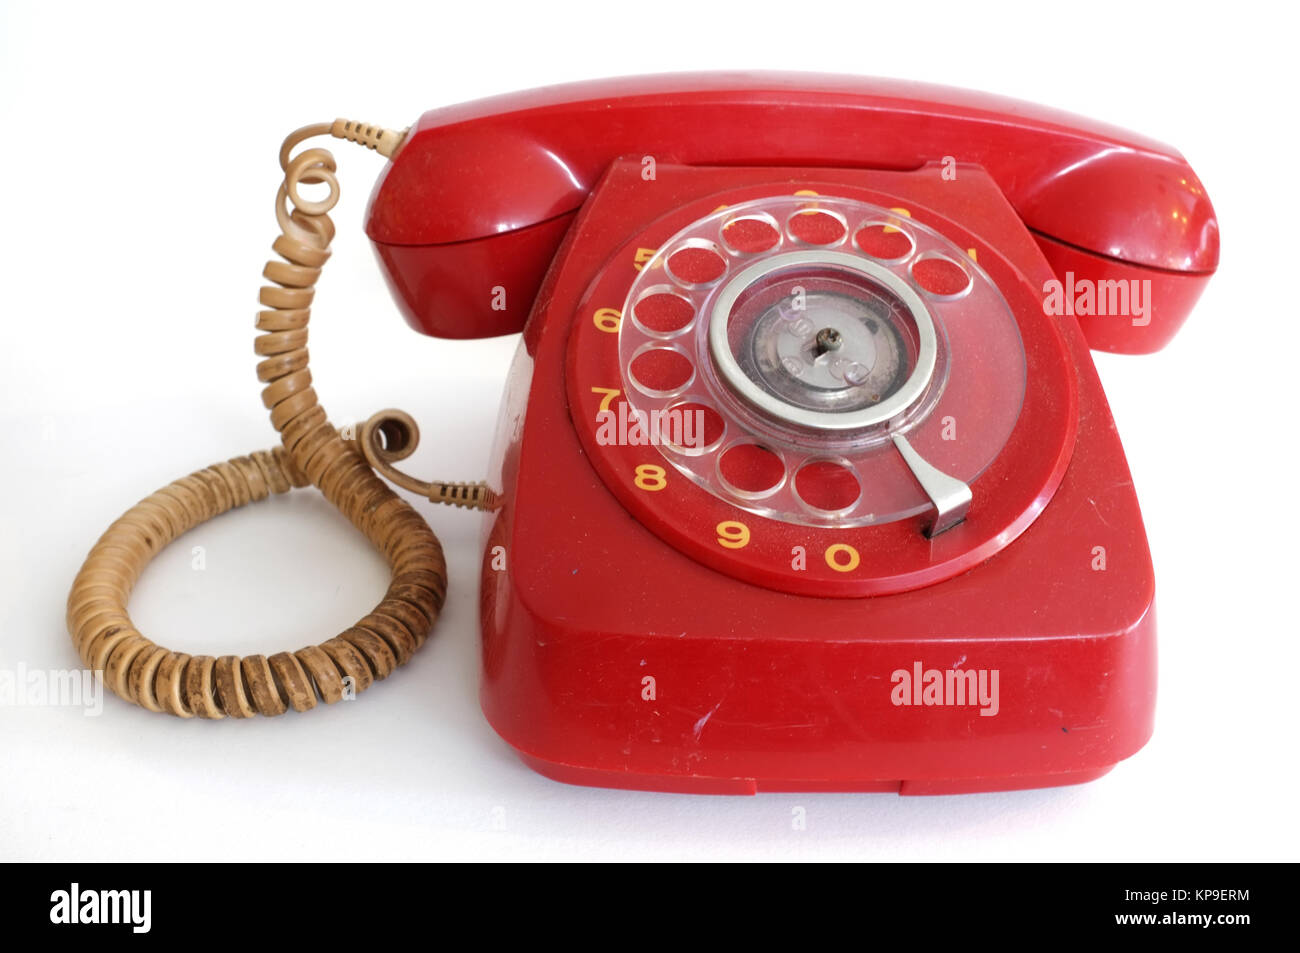 Pink red retro rotary dial telephone Stock Photo